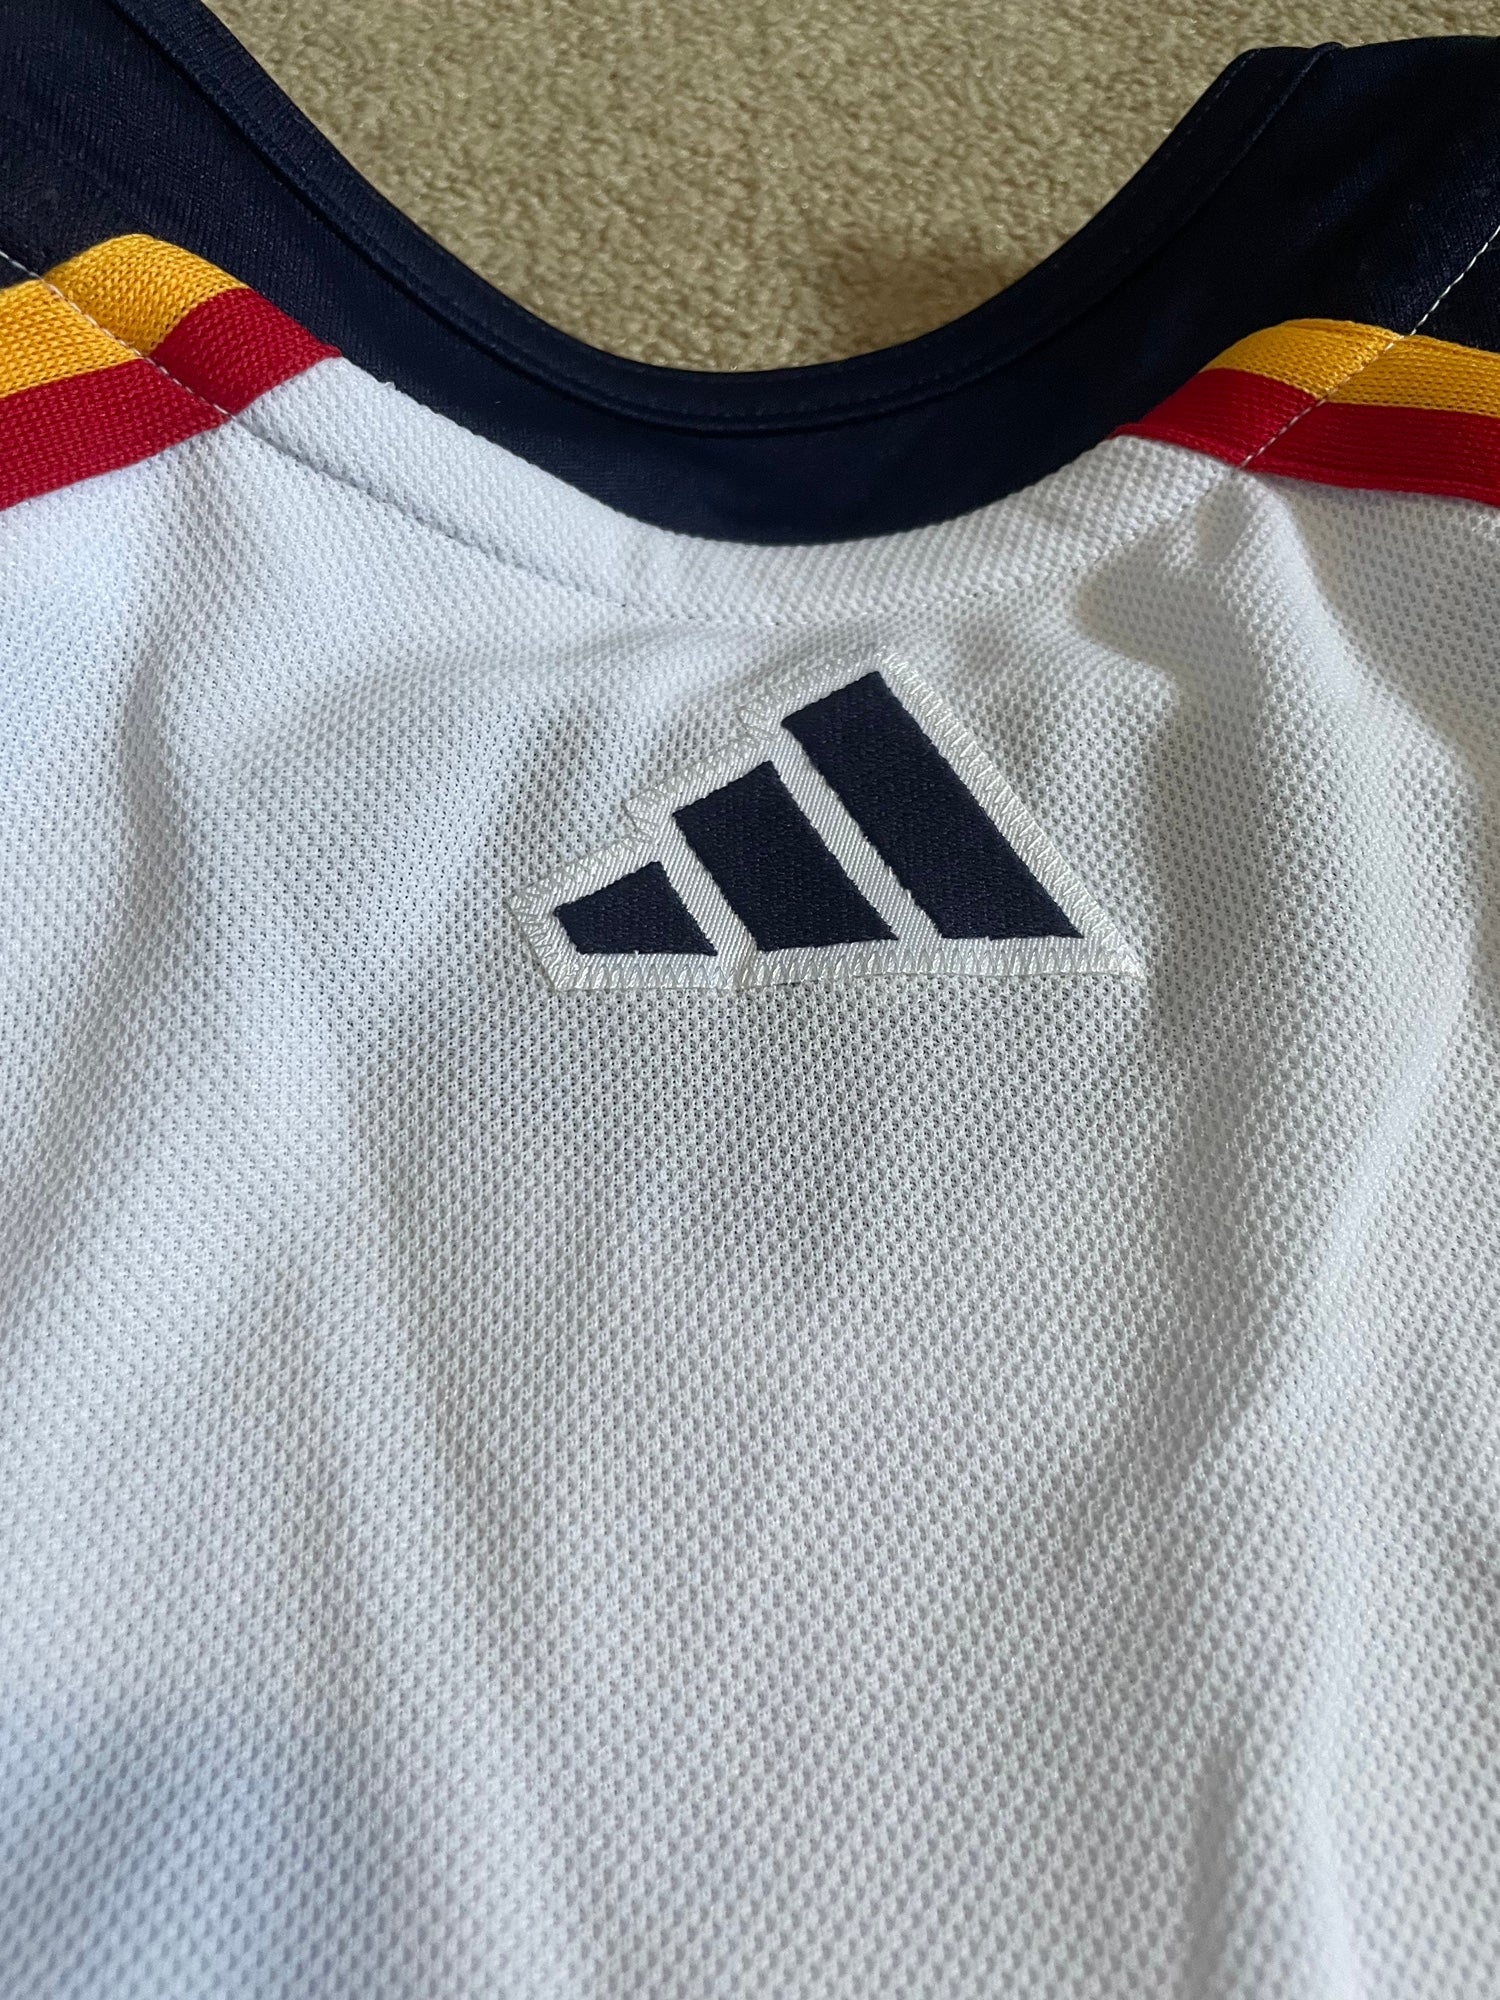 ANY NAME AND NUMBER COLORADO AVALANCHE THIRD AUTHENTIC ADIDAS NHL JERS –  Hockey Authentic